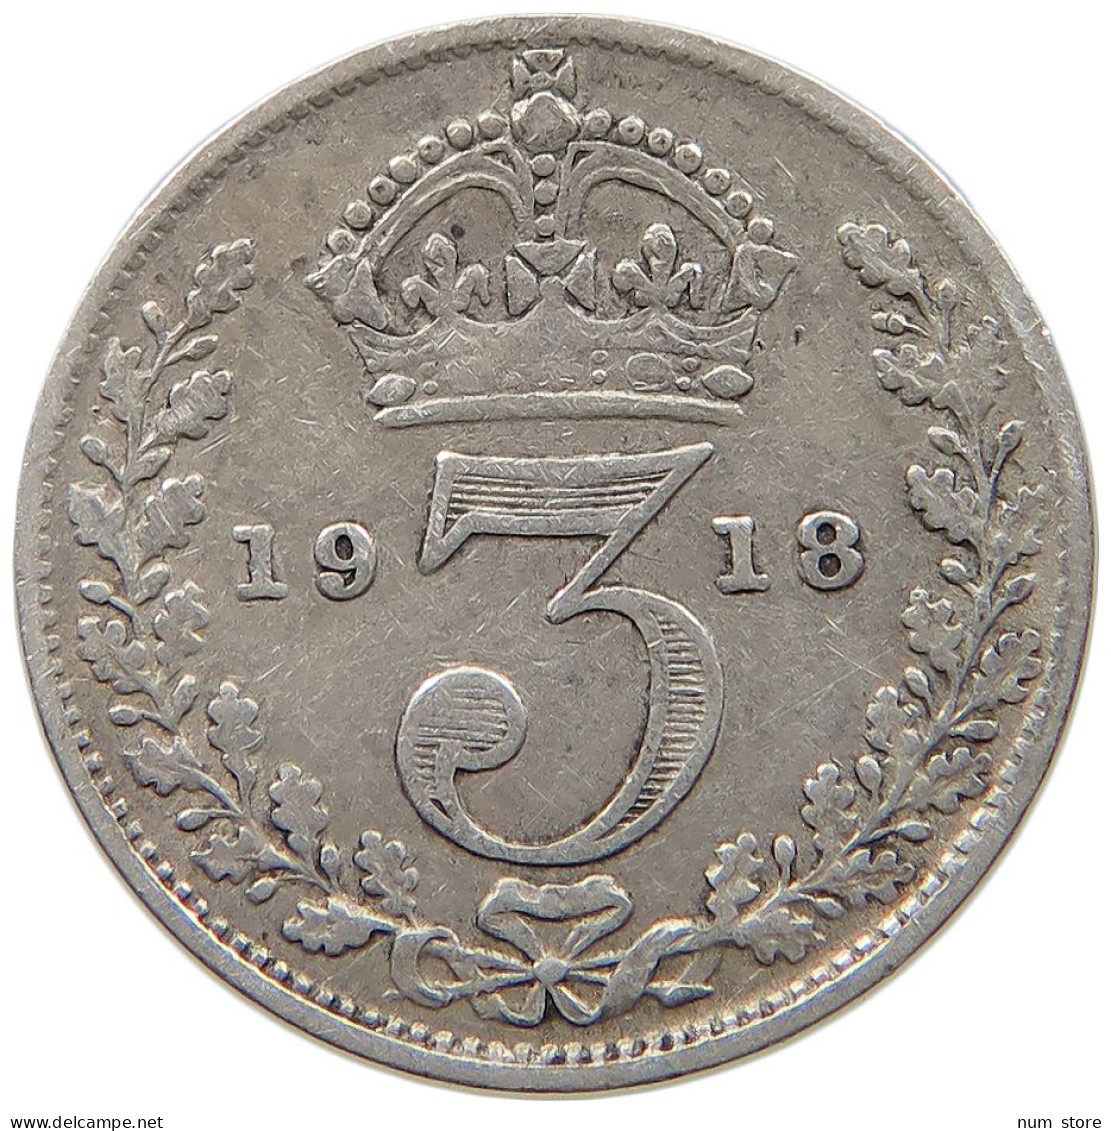 GREAT BRITAIN THREEPENCE 1918 #s059 0645 - F. 3 Pence